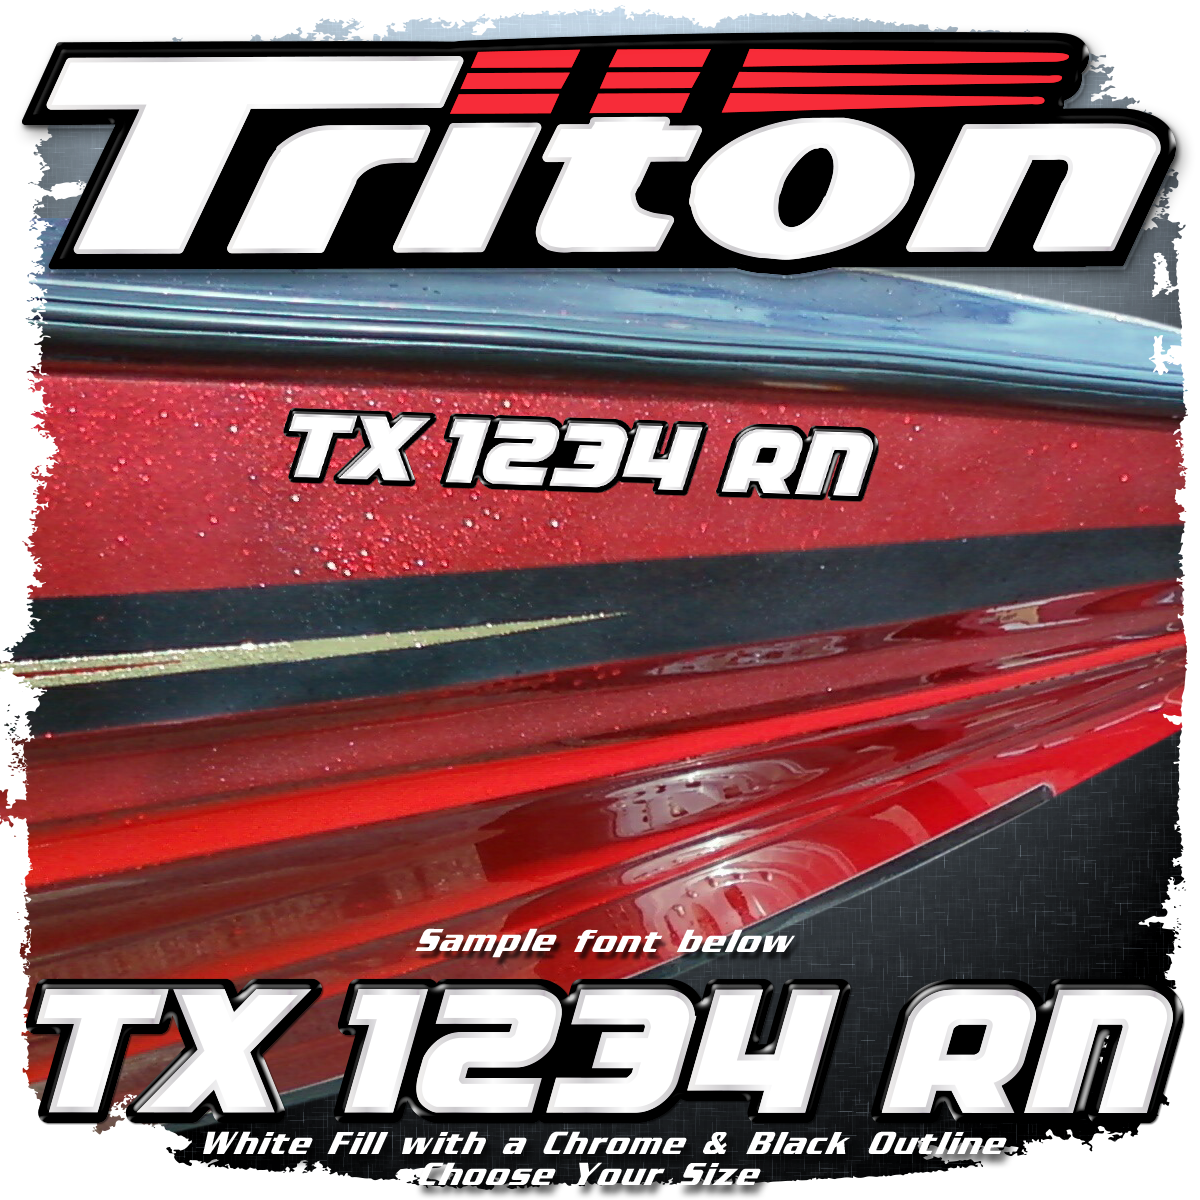 Triton Factory Matched White, Chrome & Black Registration (2 included)